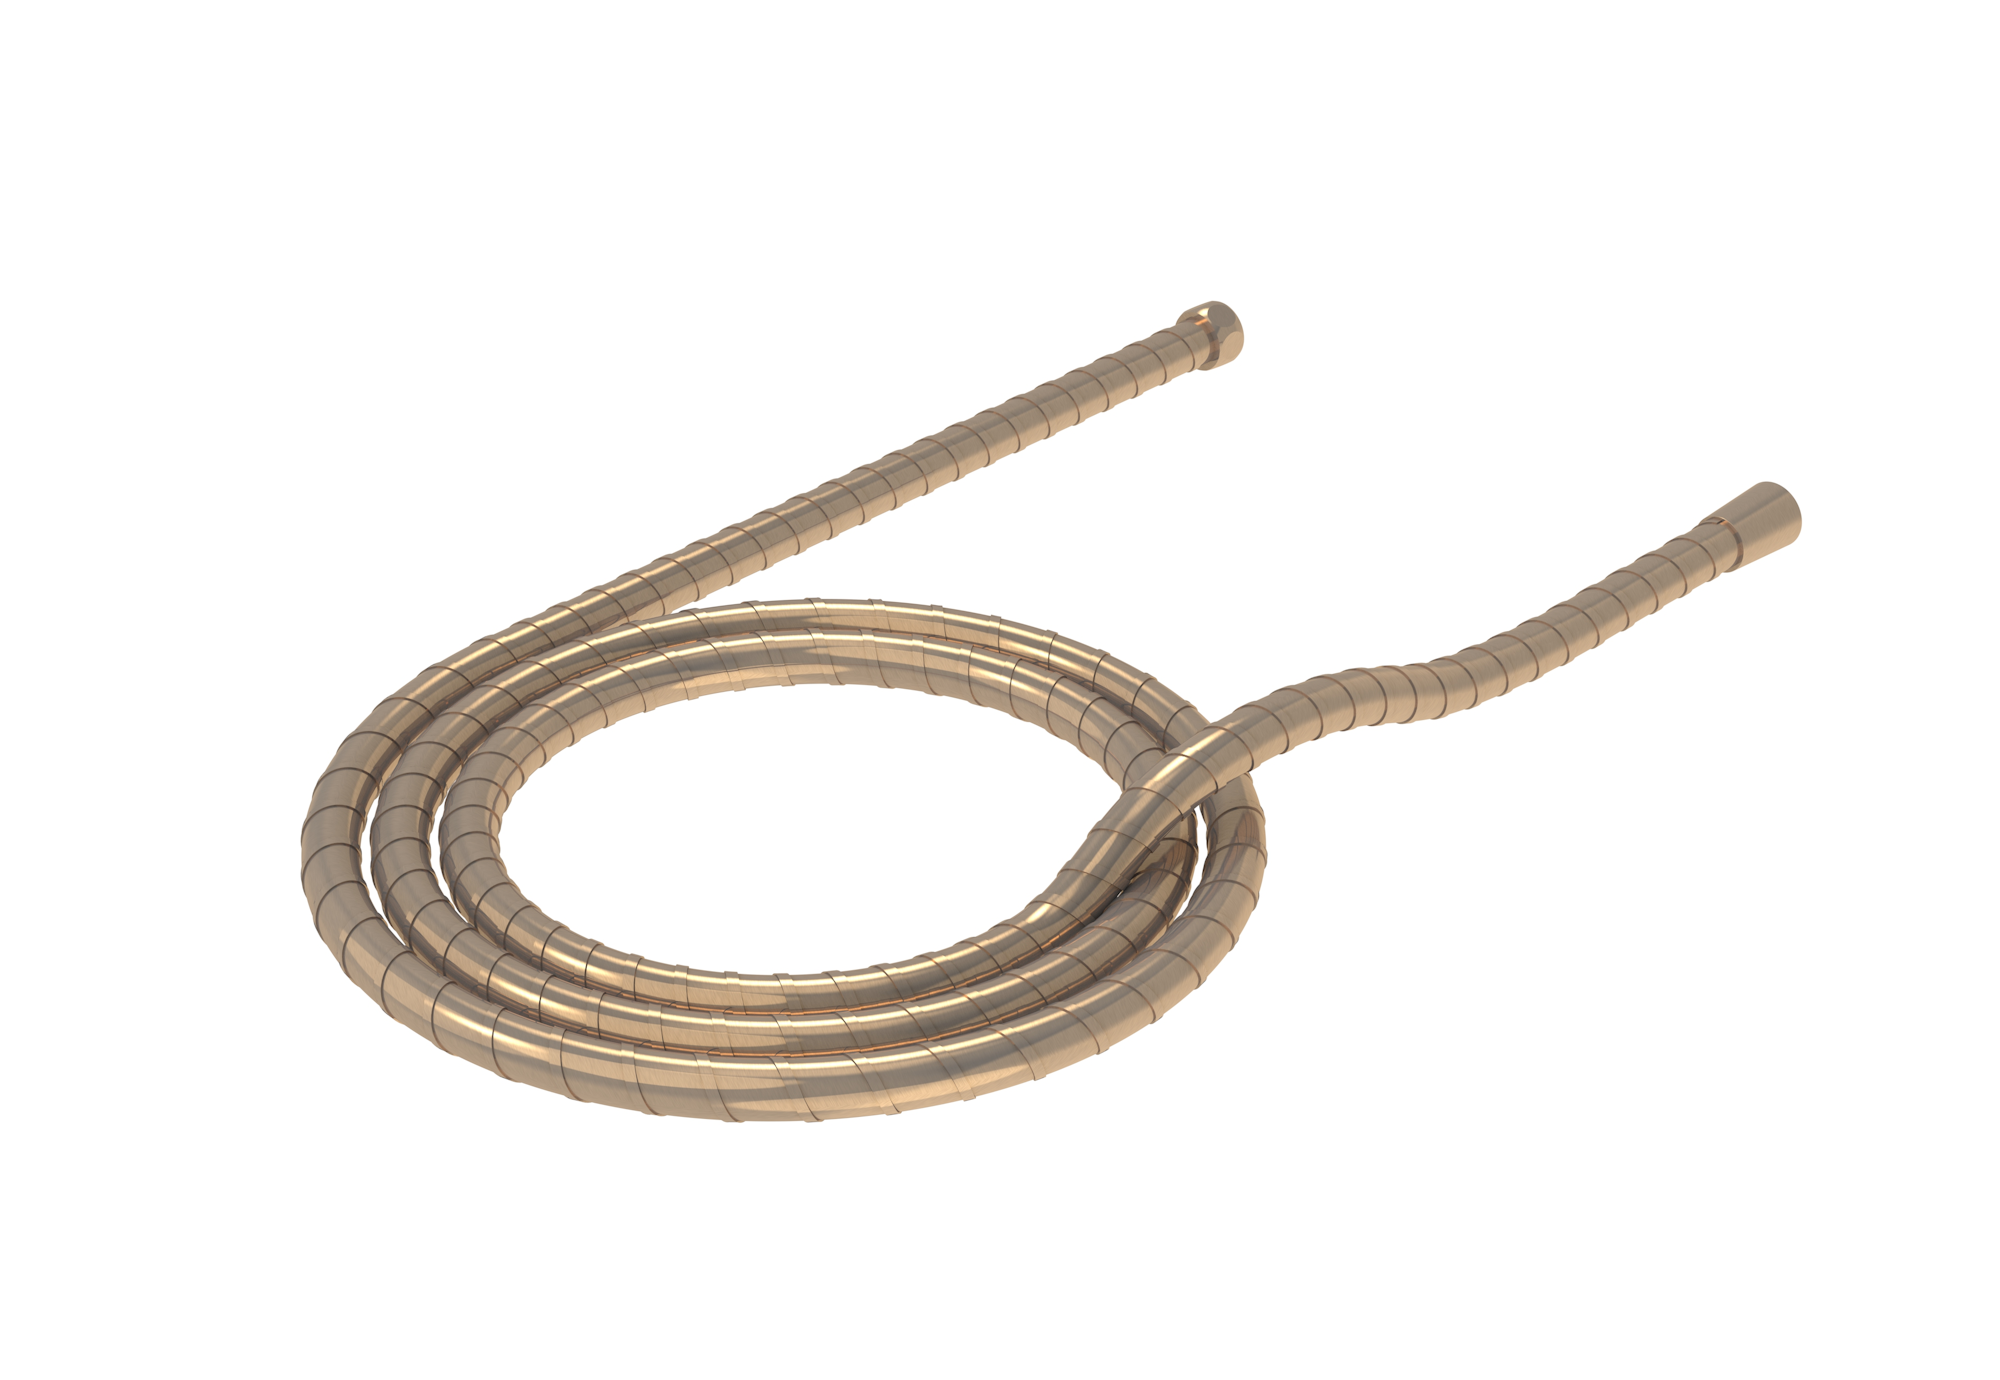 1.8m stainless steel shower hose - Brushed Bronze (PVD)